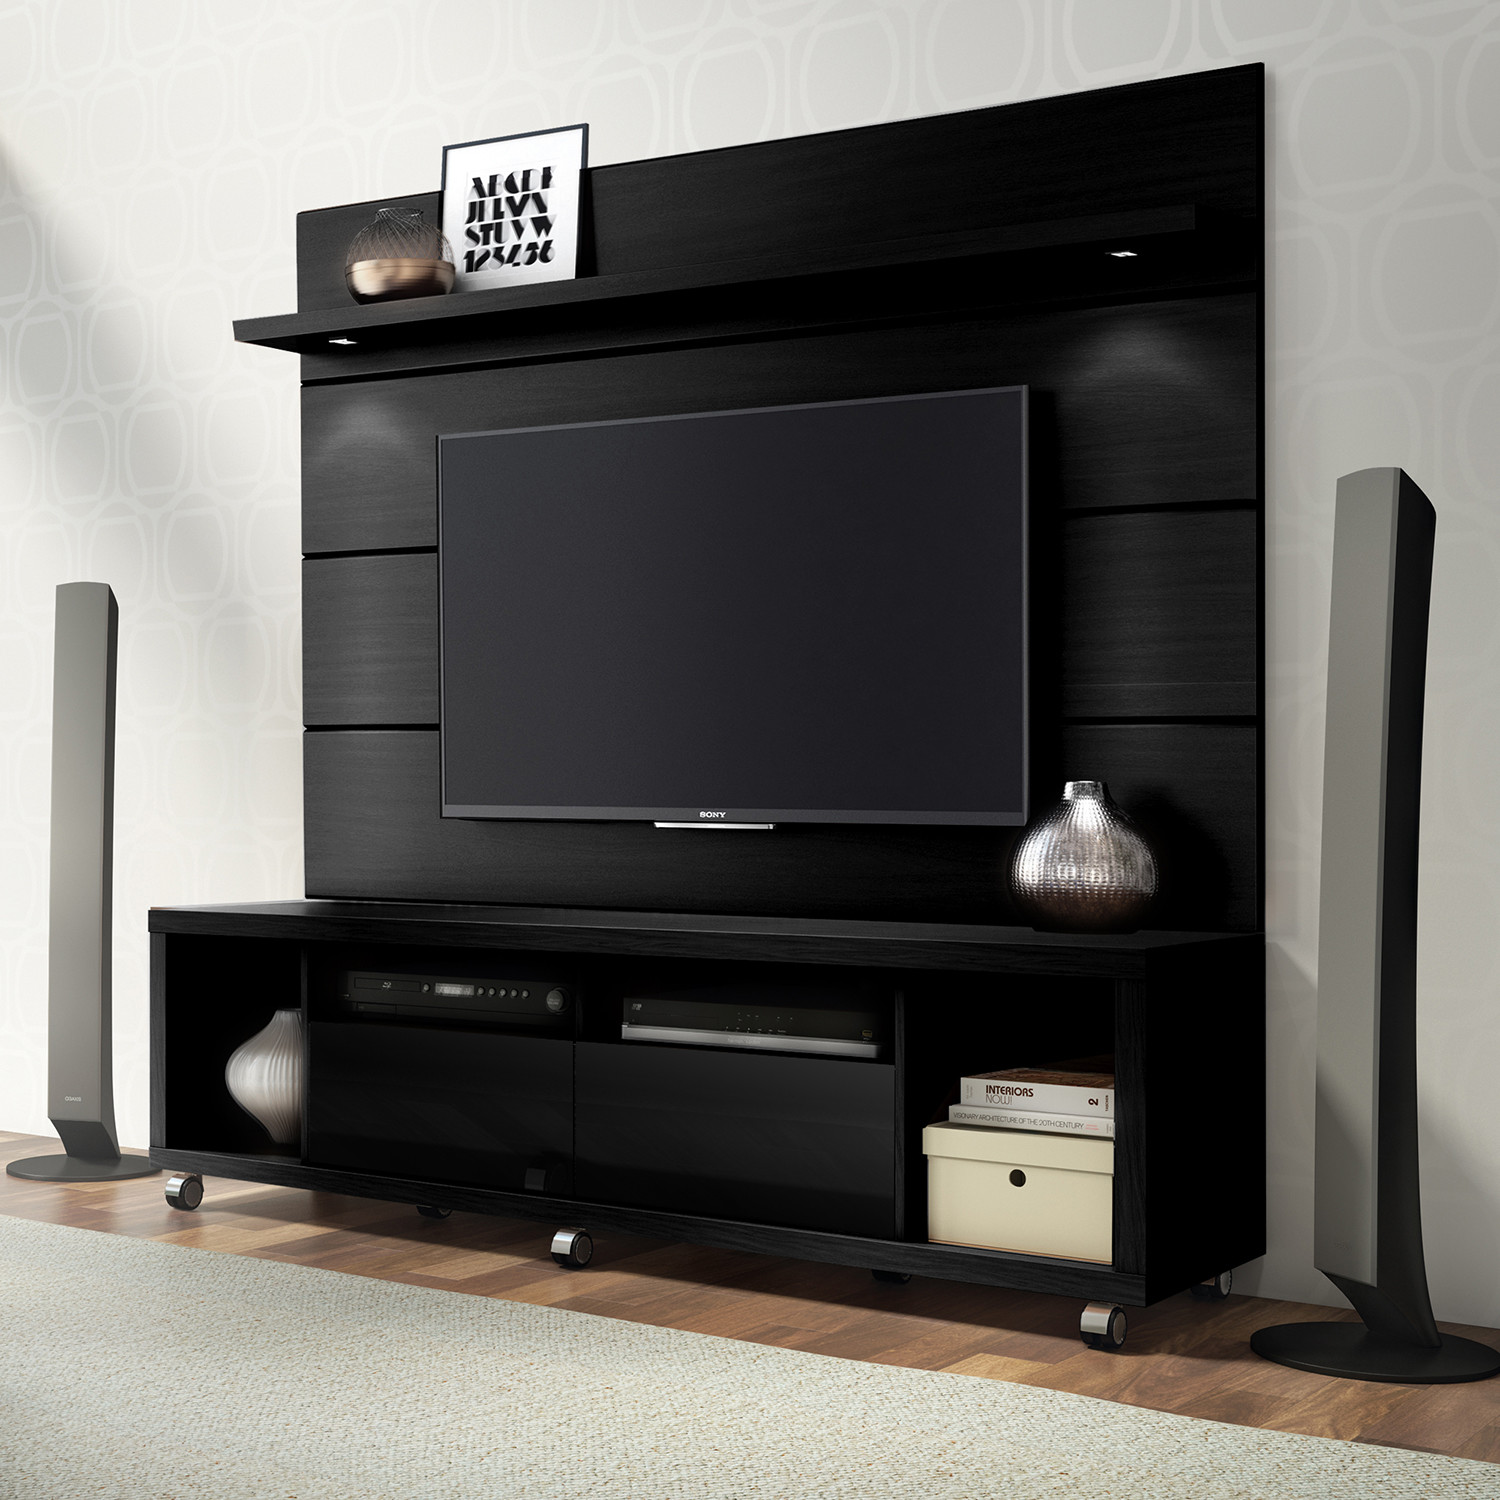 Featured image of post Modern Floating Tv Stand With Led Lights / Whether watching a movie with the entire family or tidying up the space, this furniture helps enhance the home.